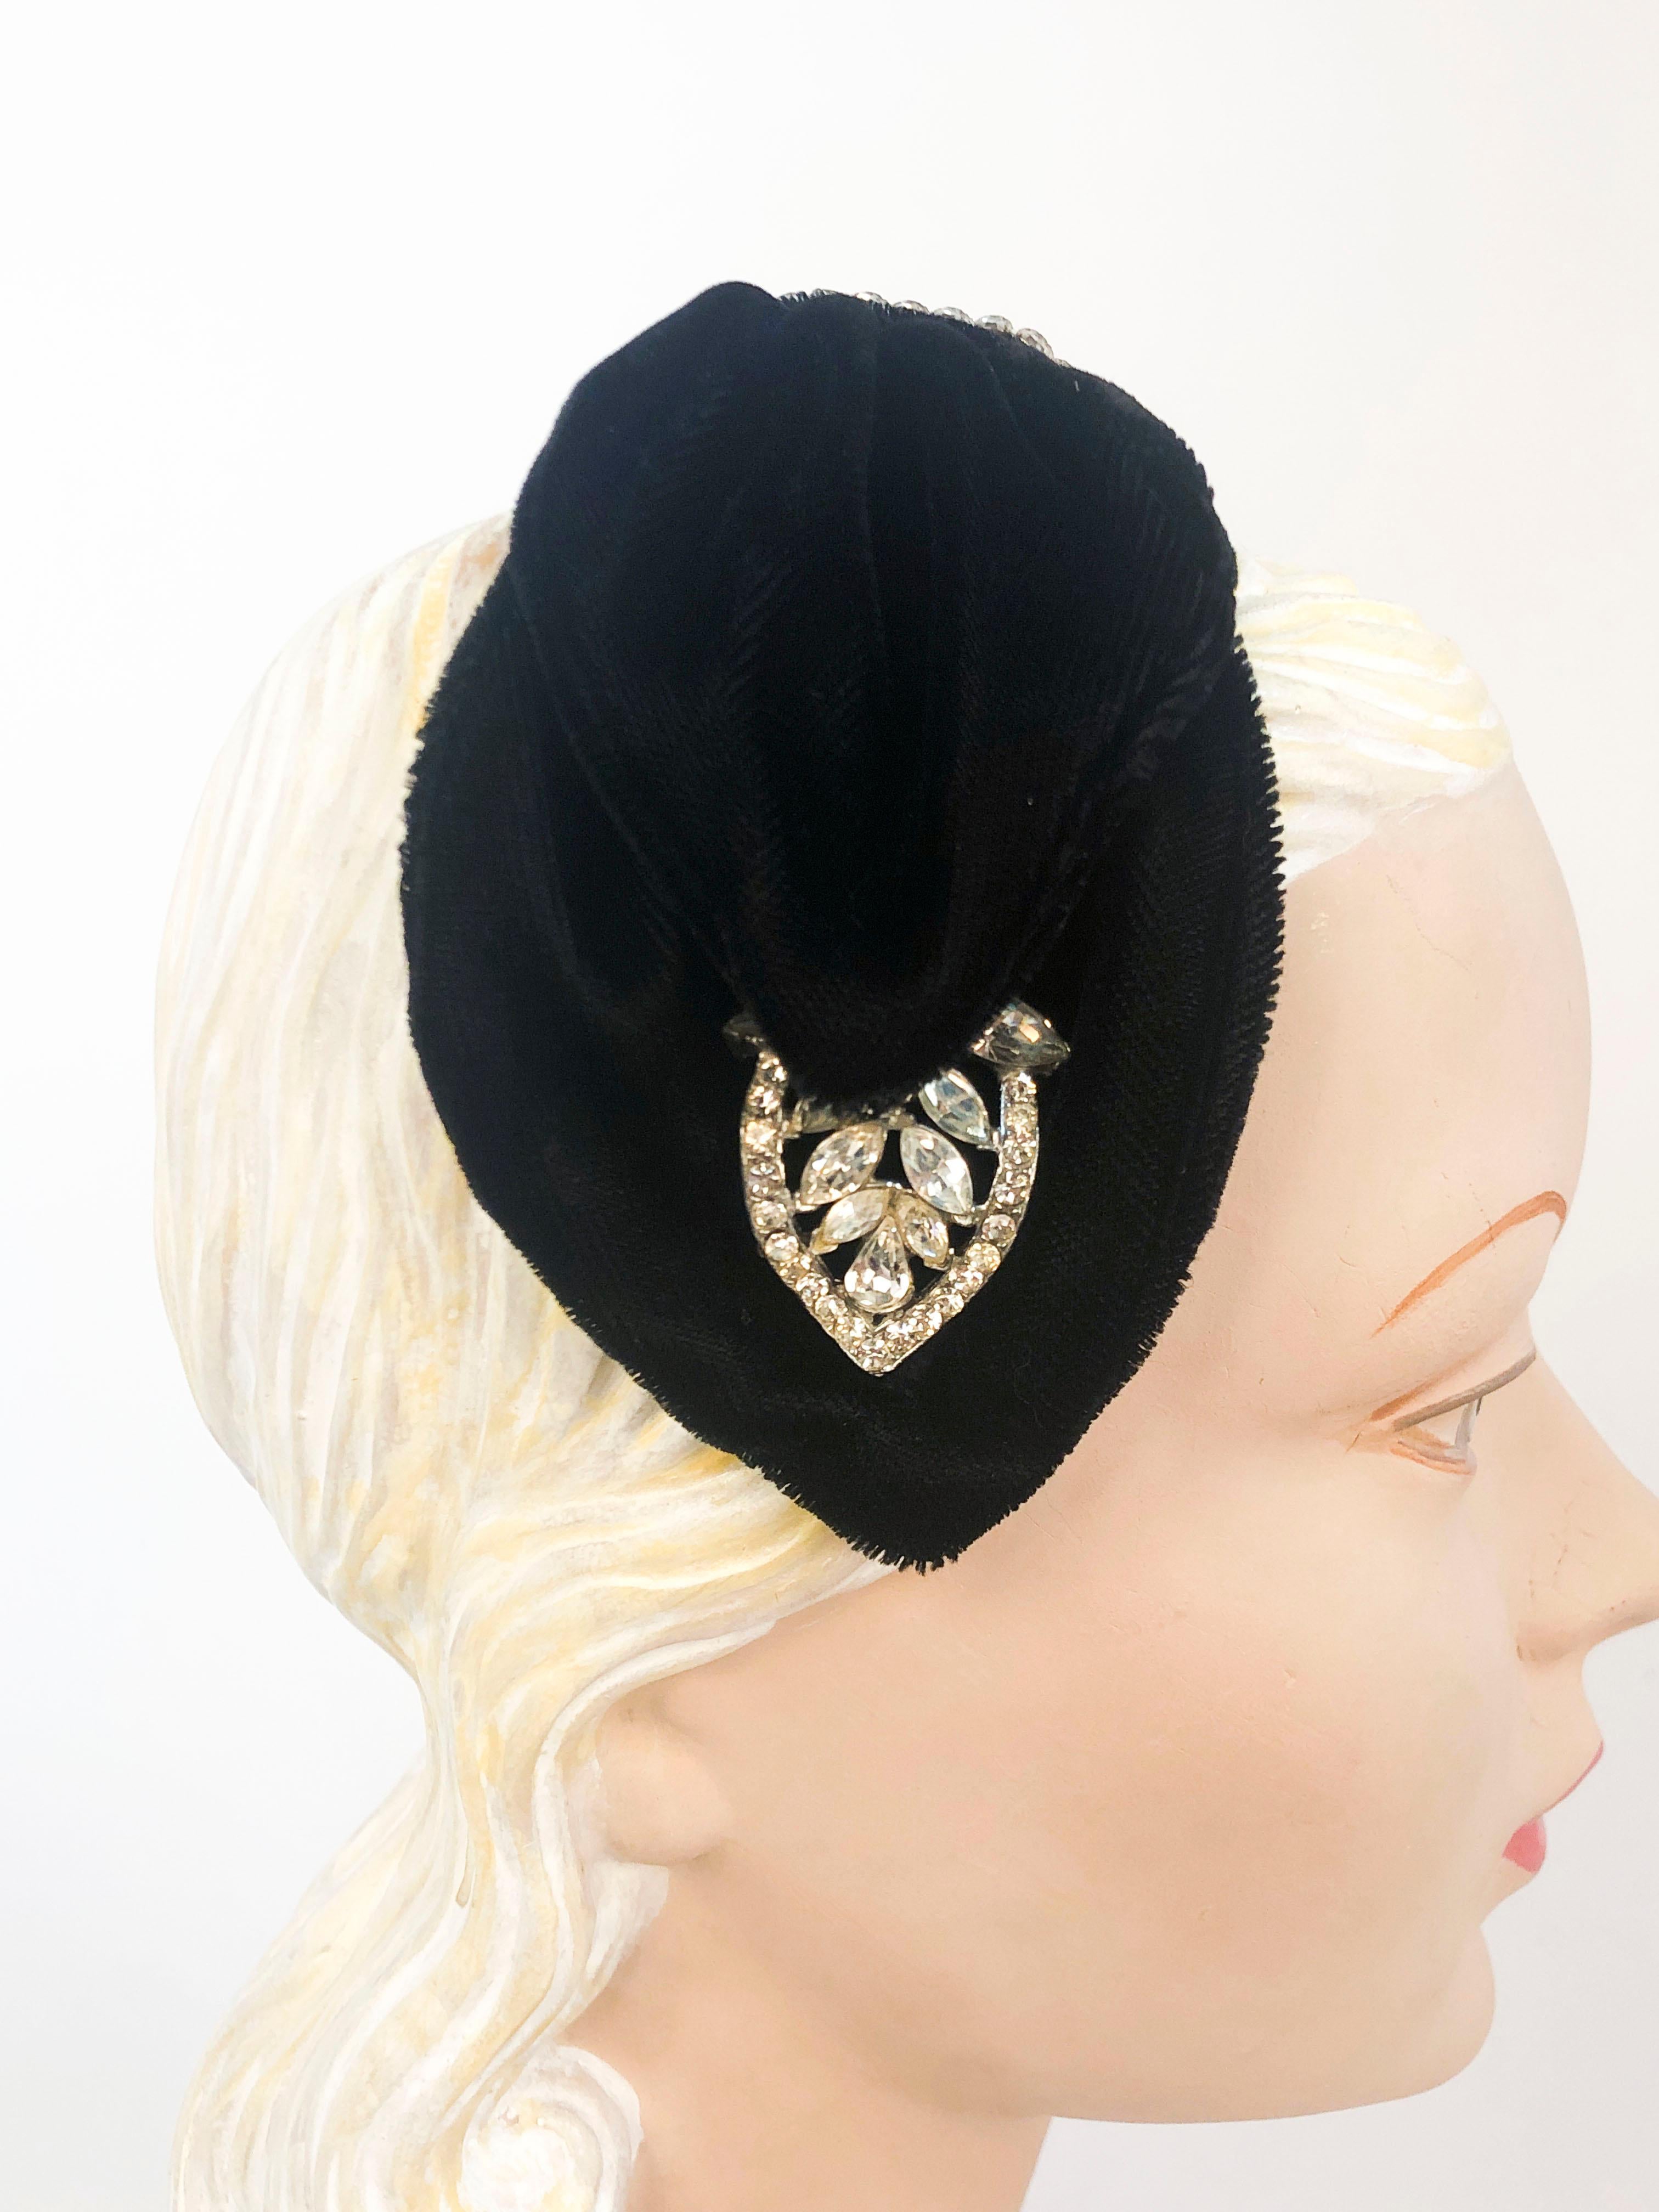 1950's Black Velvet Cocktail Hat with Rhinestone Accents 1